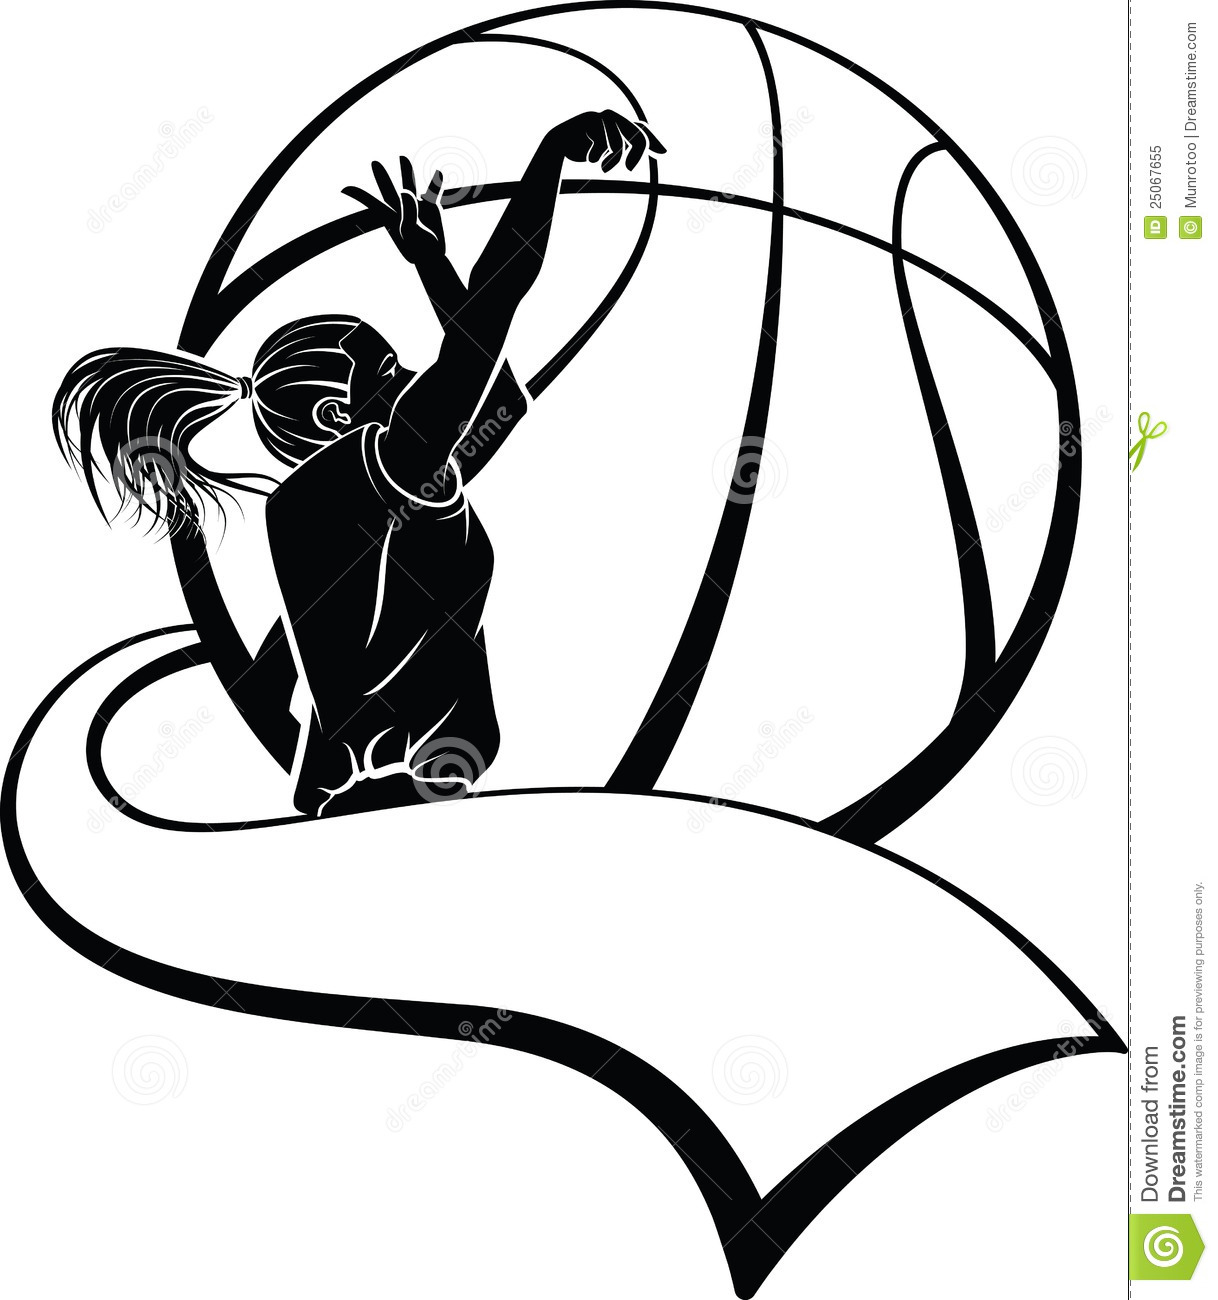 Basketball Hoop Clipart Black And White   Clipart Panda   Free Clipart    